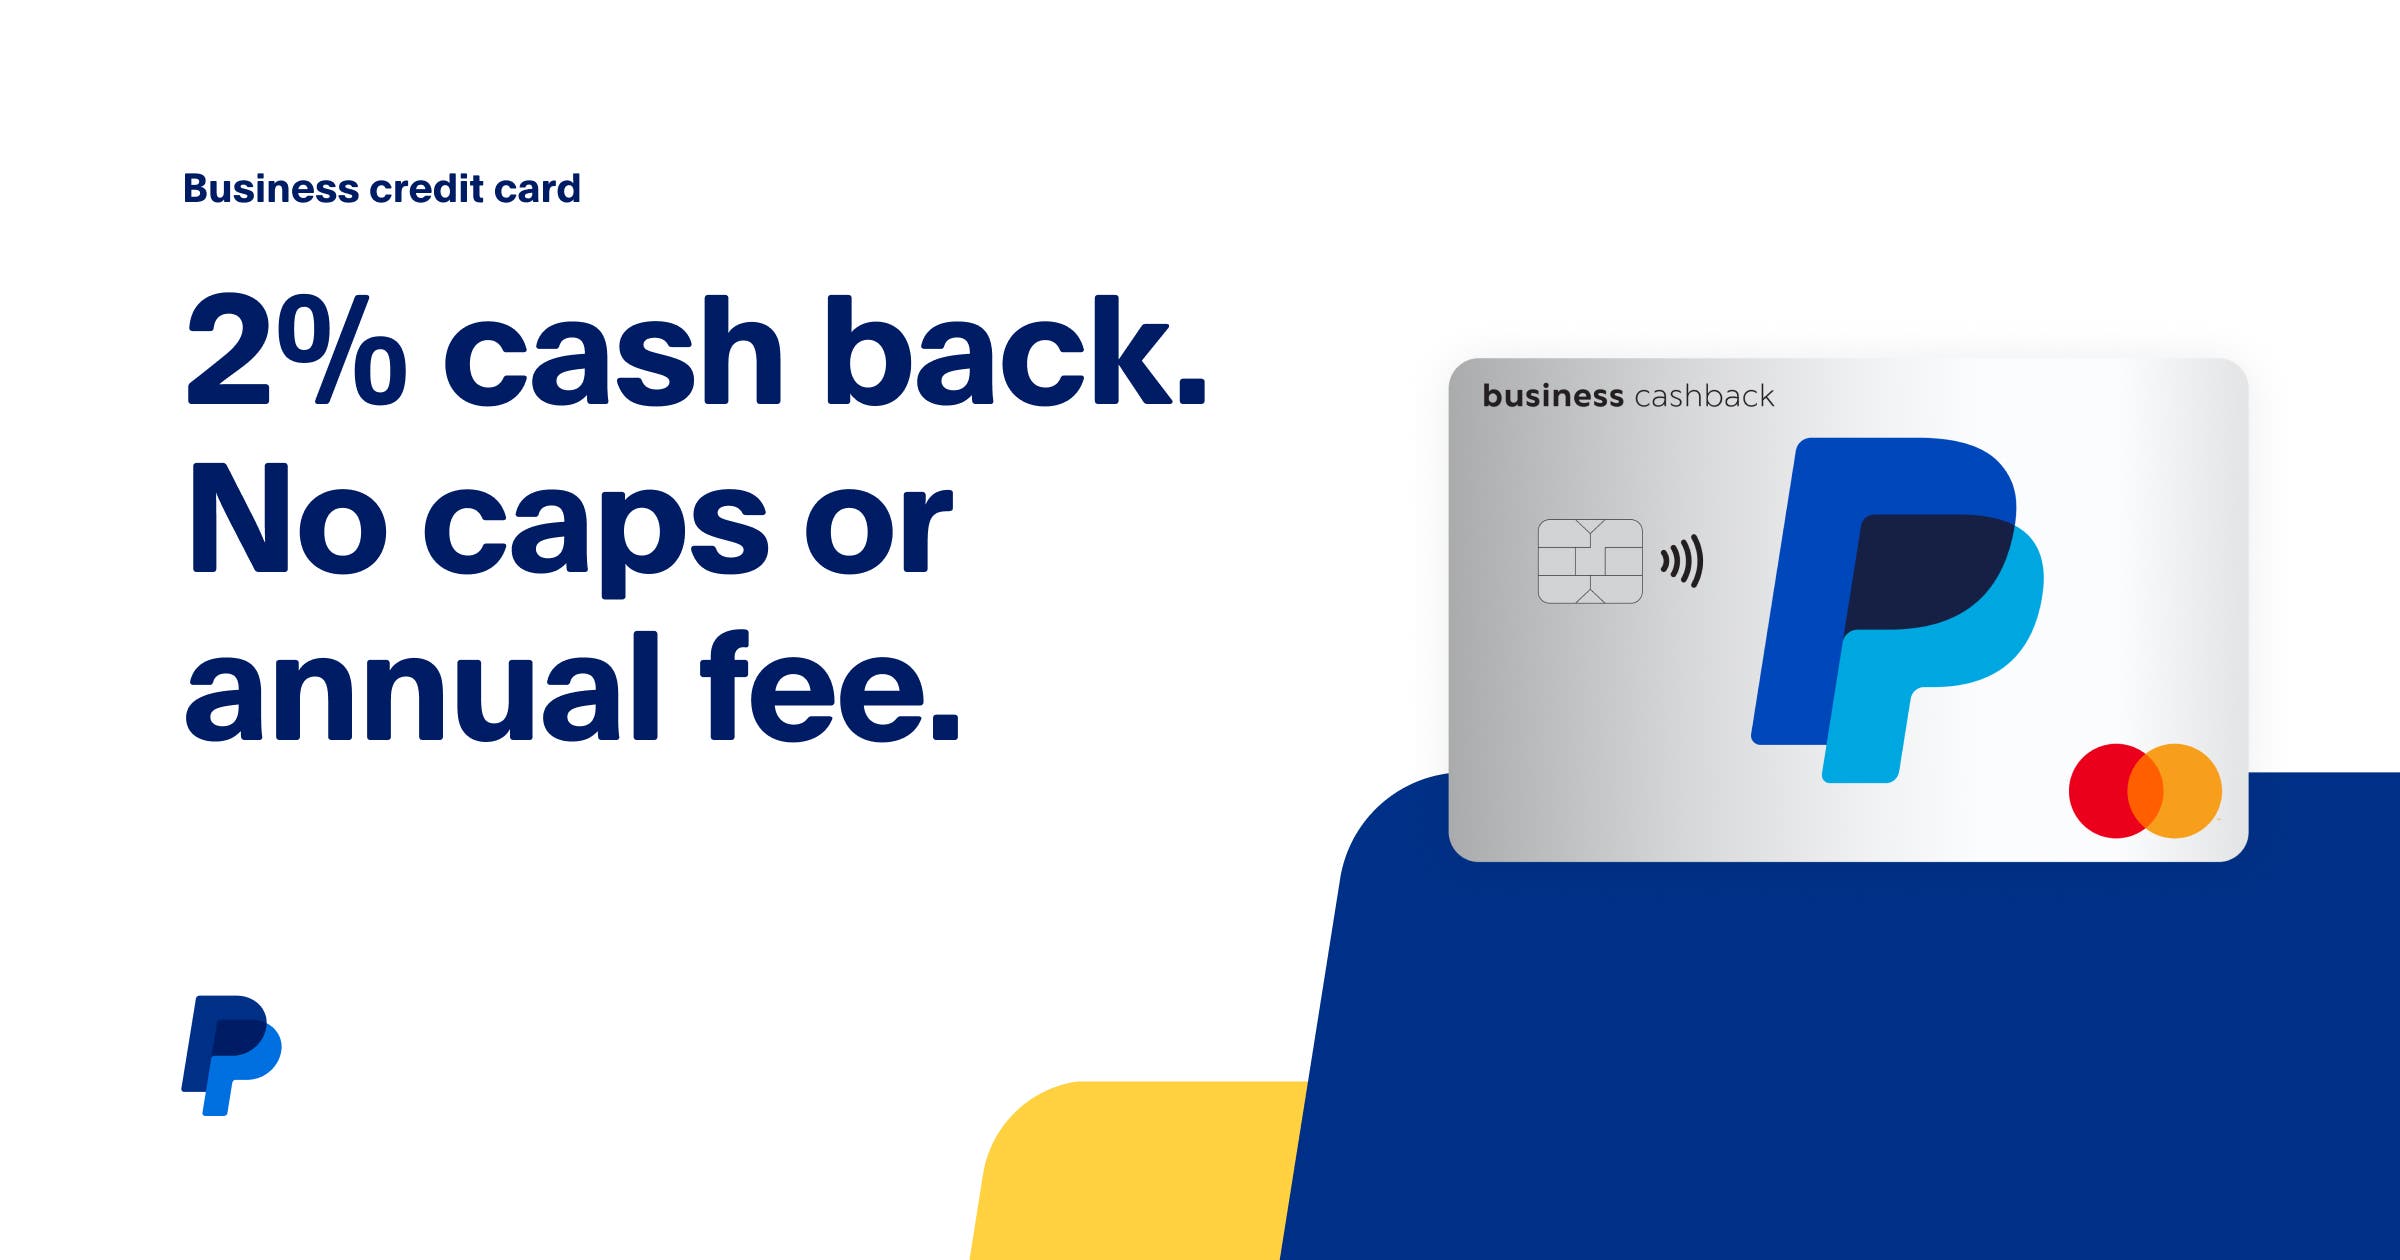 Learn More about the PayPal Cashback Mastercard®